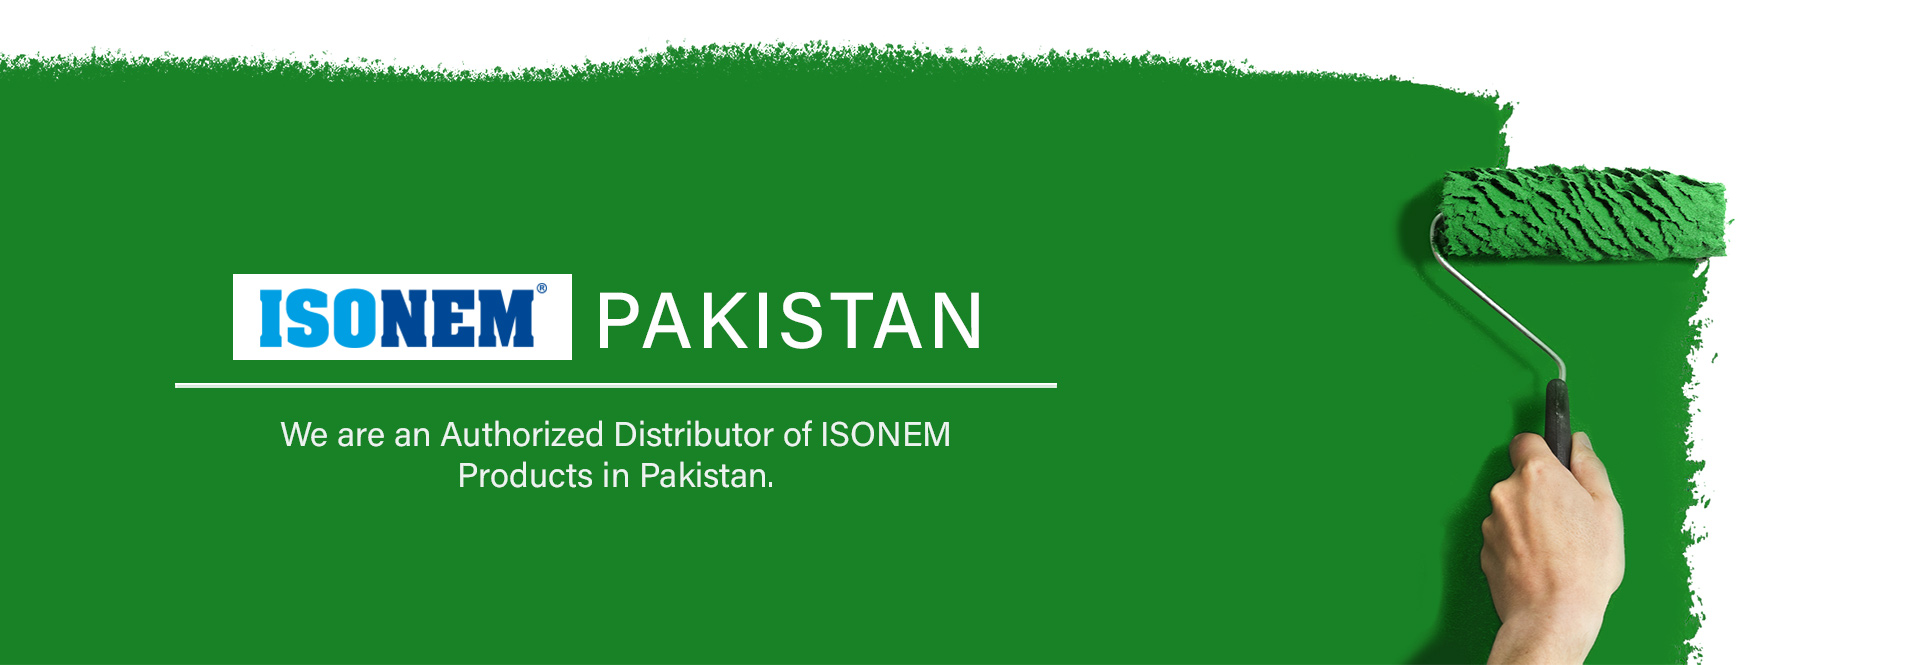 ISONEM Top Quality Brand In Pakistan paints & coatings, Special Paints, roof waterproofing company, wall sealing, paint with epoxy, epoxy flooring, floor paint, floor coating, industrial chemical, chemical company, spray paint, spray paint color, spray products